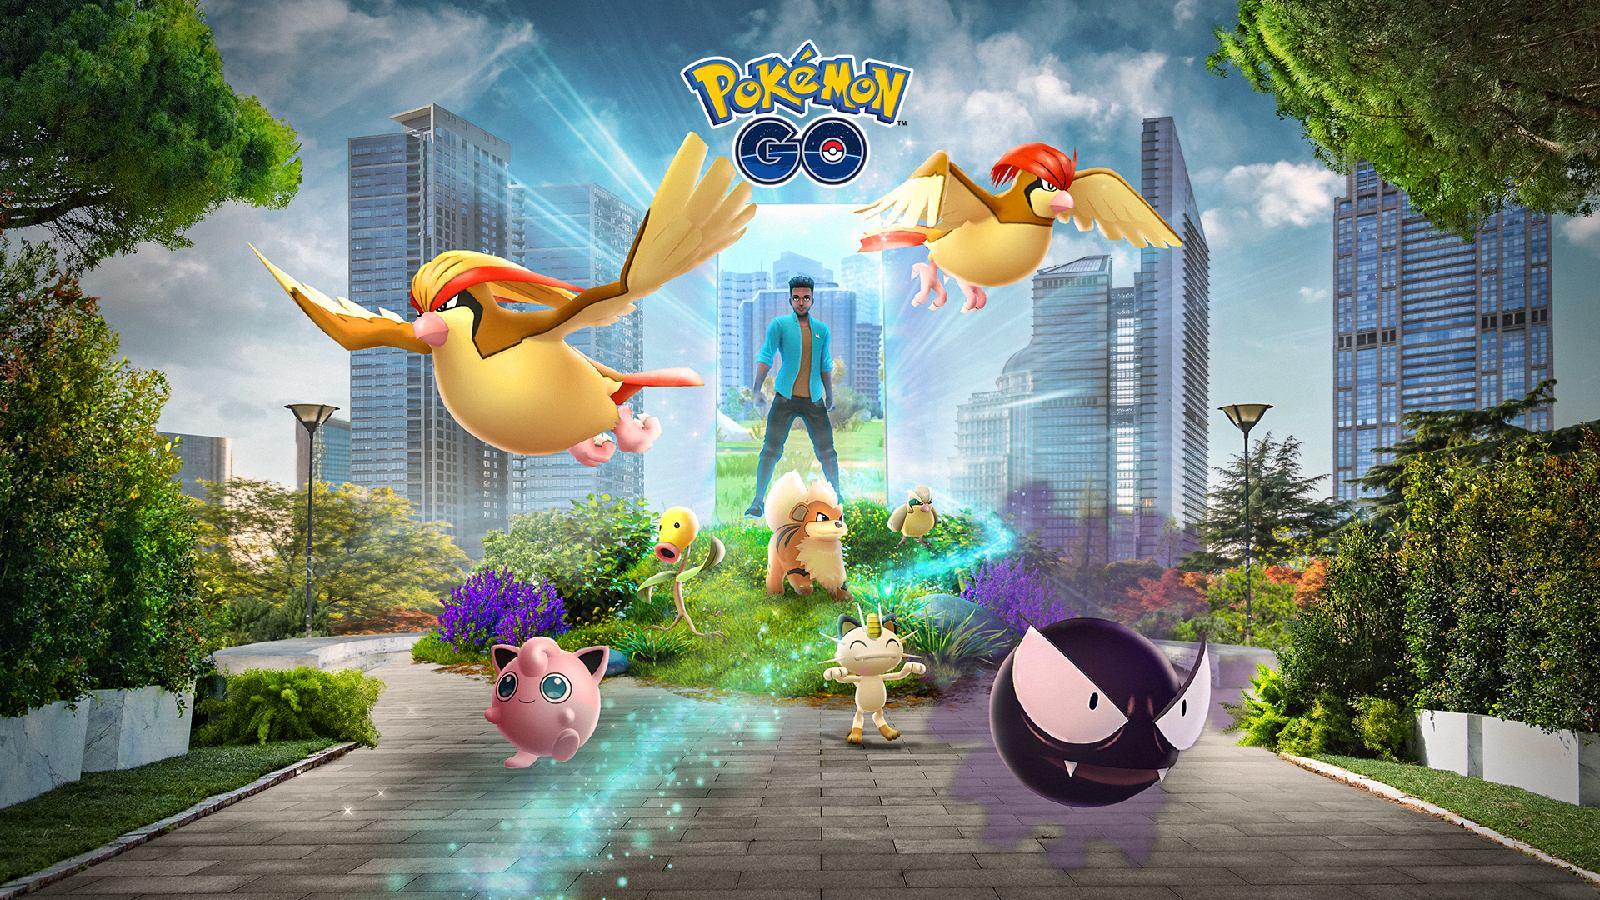 Key art is shown for the Pokemon Go rediscover Go event